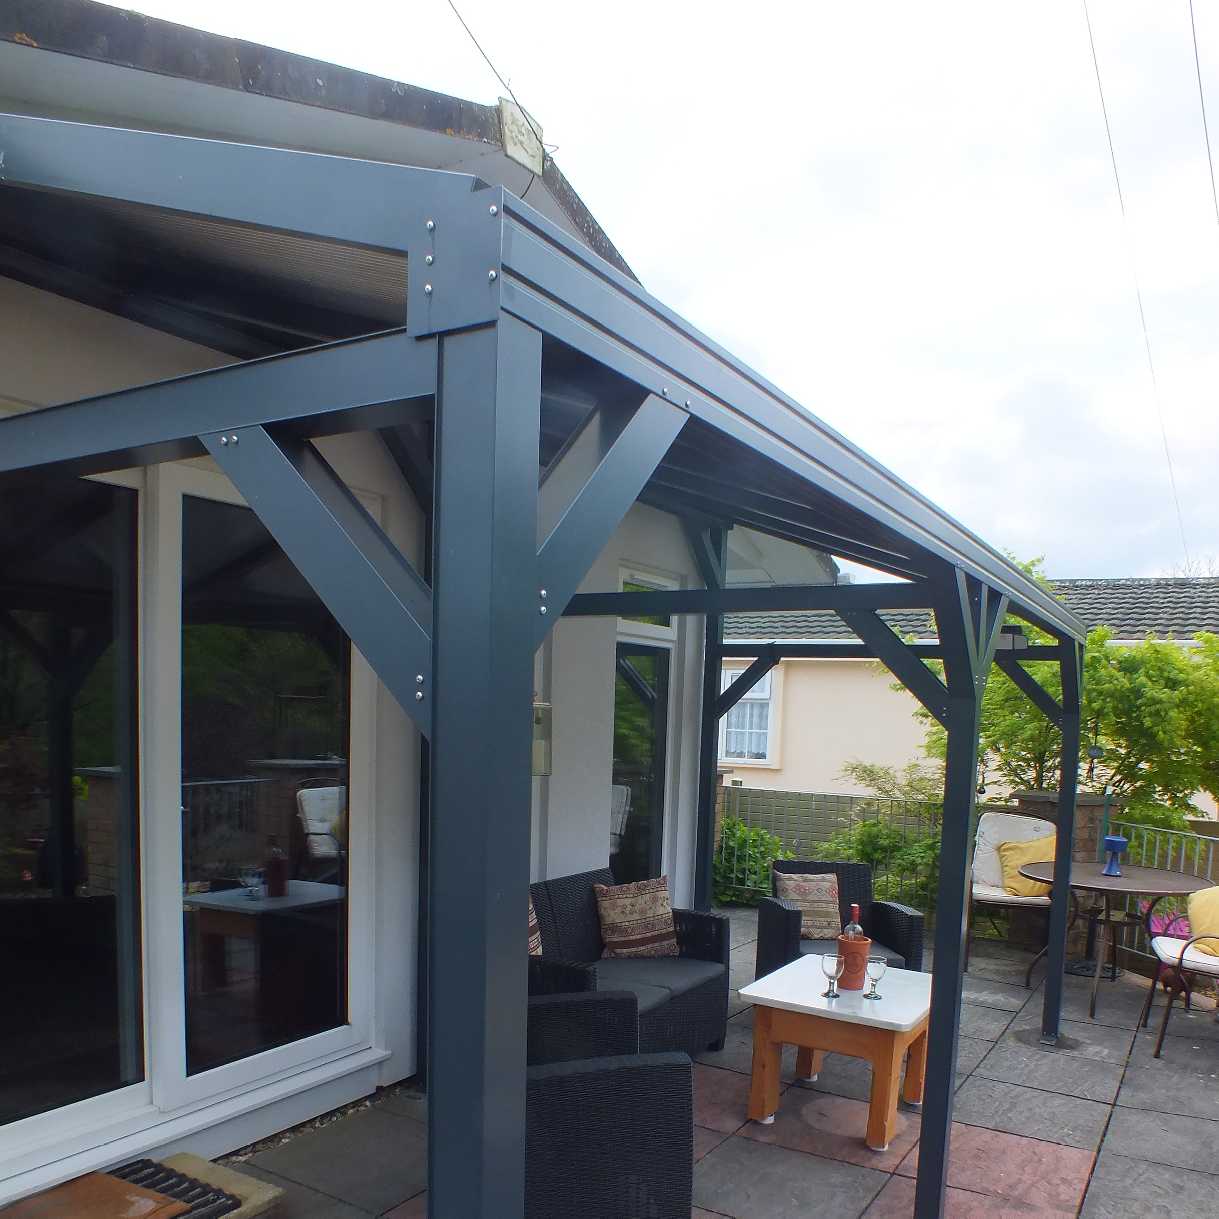 Affordable Omega Smart Free-Standing, Anthracite Grey MonoPitch Roof Canopy with 16mm Polycarbonate Glazing - 5.2m (W) x 3.0m (P), (6) Supporting Posts